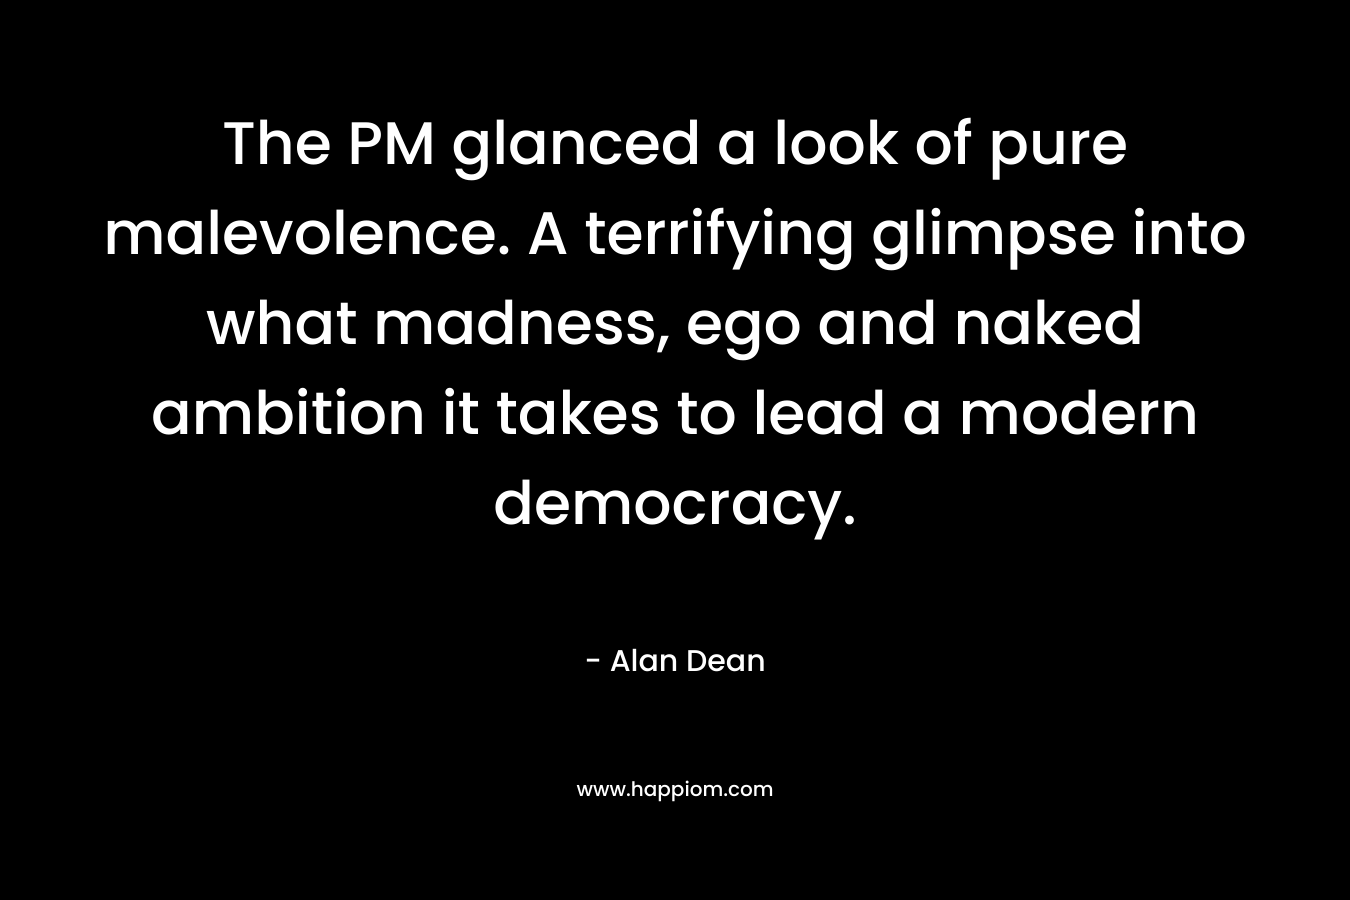 The PM glanced a look of pure malevolence. A terrifying glimpse into what madness, ego and naked ambition it takes to lead a modern democracy. – Alan Dean